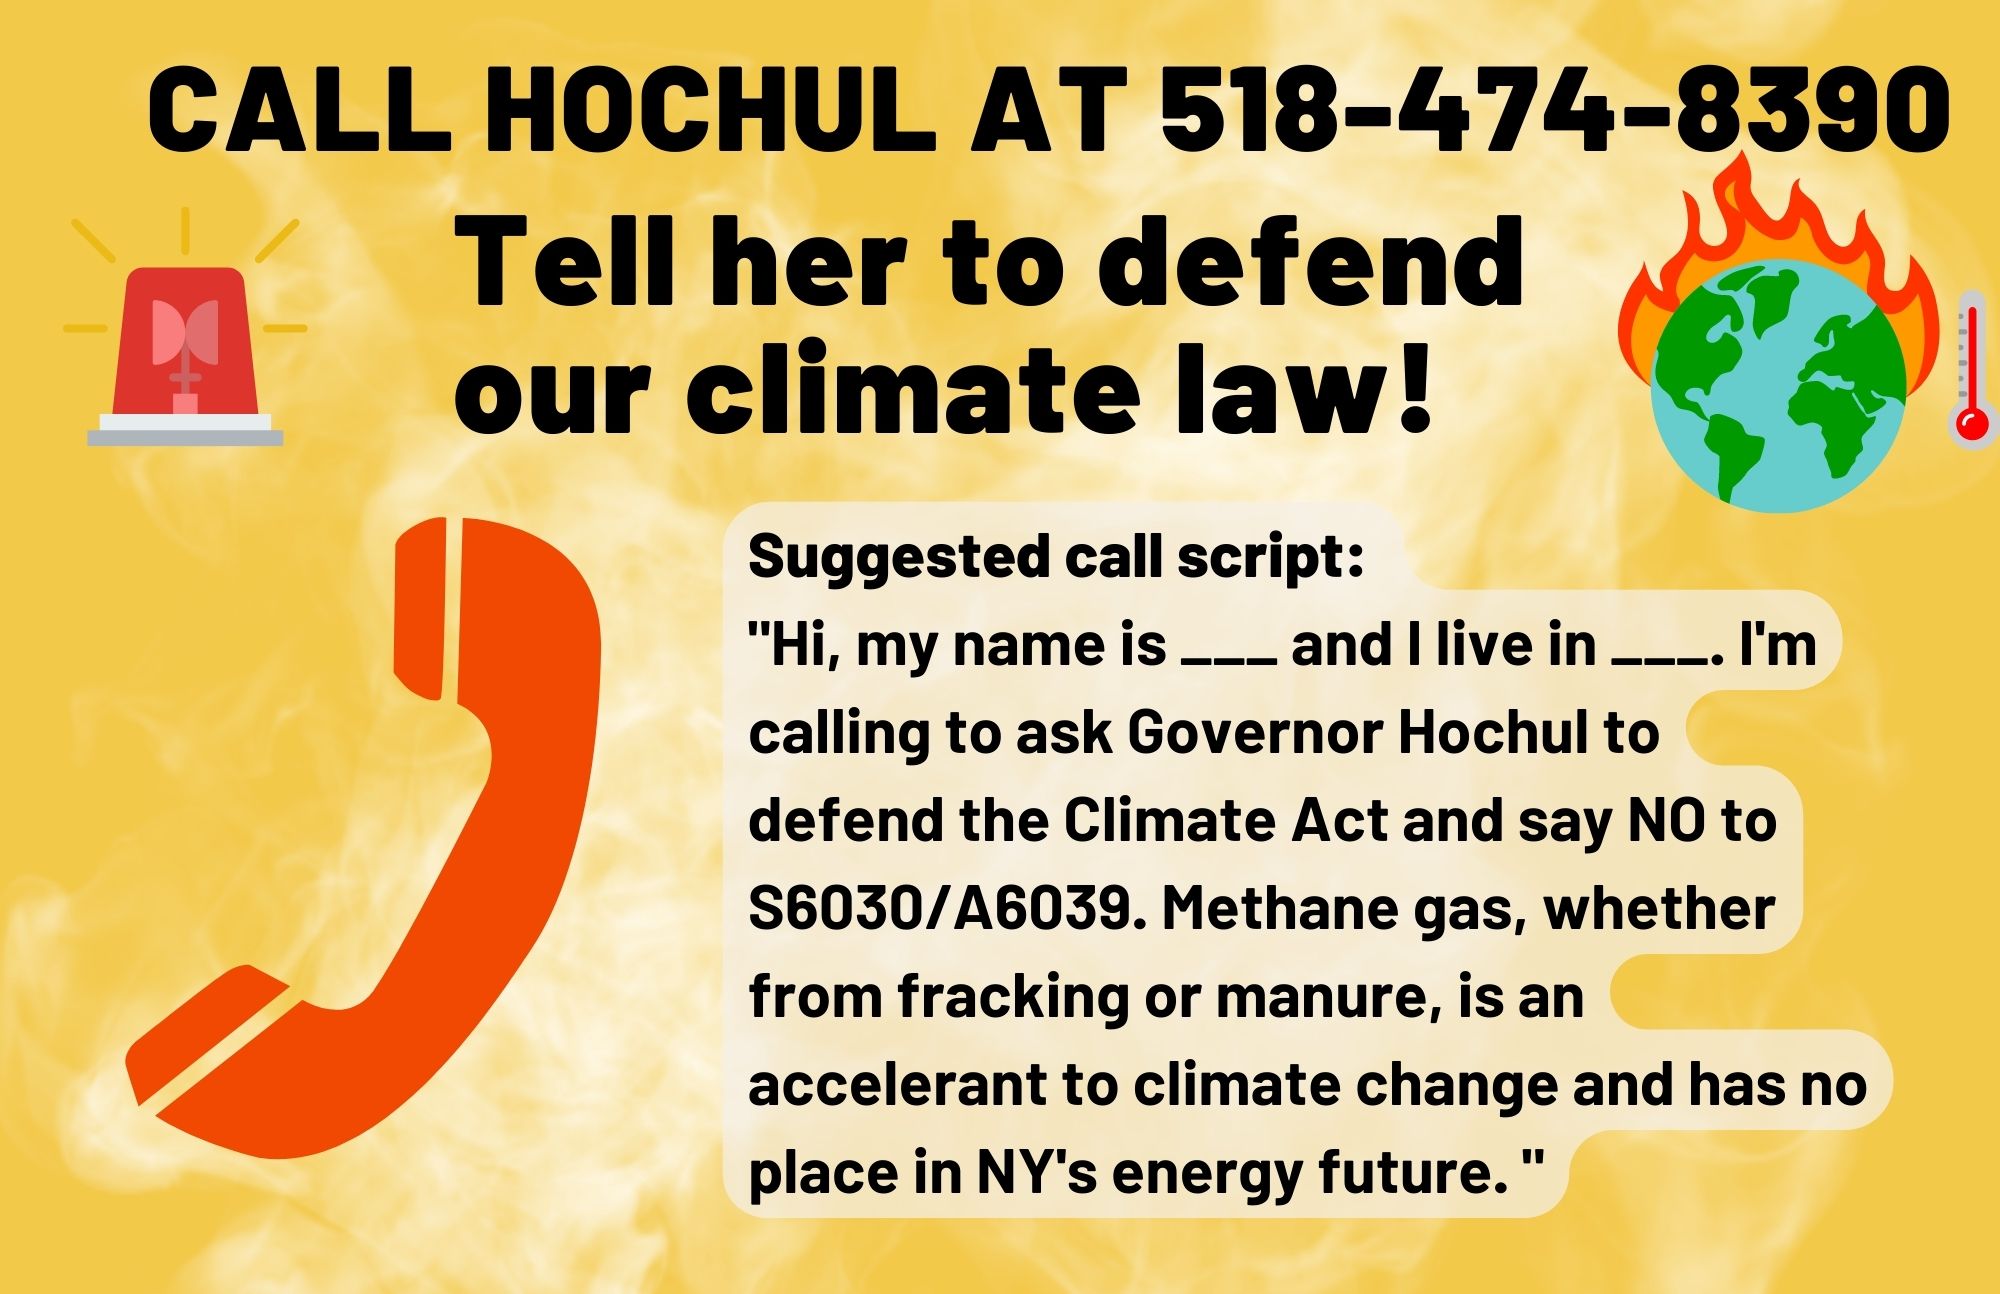 instructions to call Hochul at 518 4747 8390, with suggested call script: hi my name is blank and I live in blank. I'm calling to ask governor hochul to defend the climate act and say no to s6030/a6039. methane gas, whether from fracking or manure, is an accelerant to climate change and has no place in New York's energy future